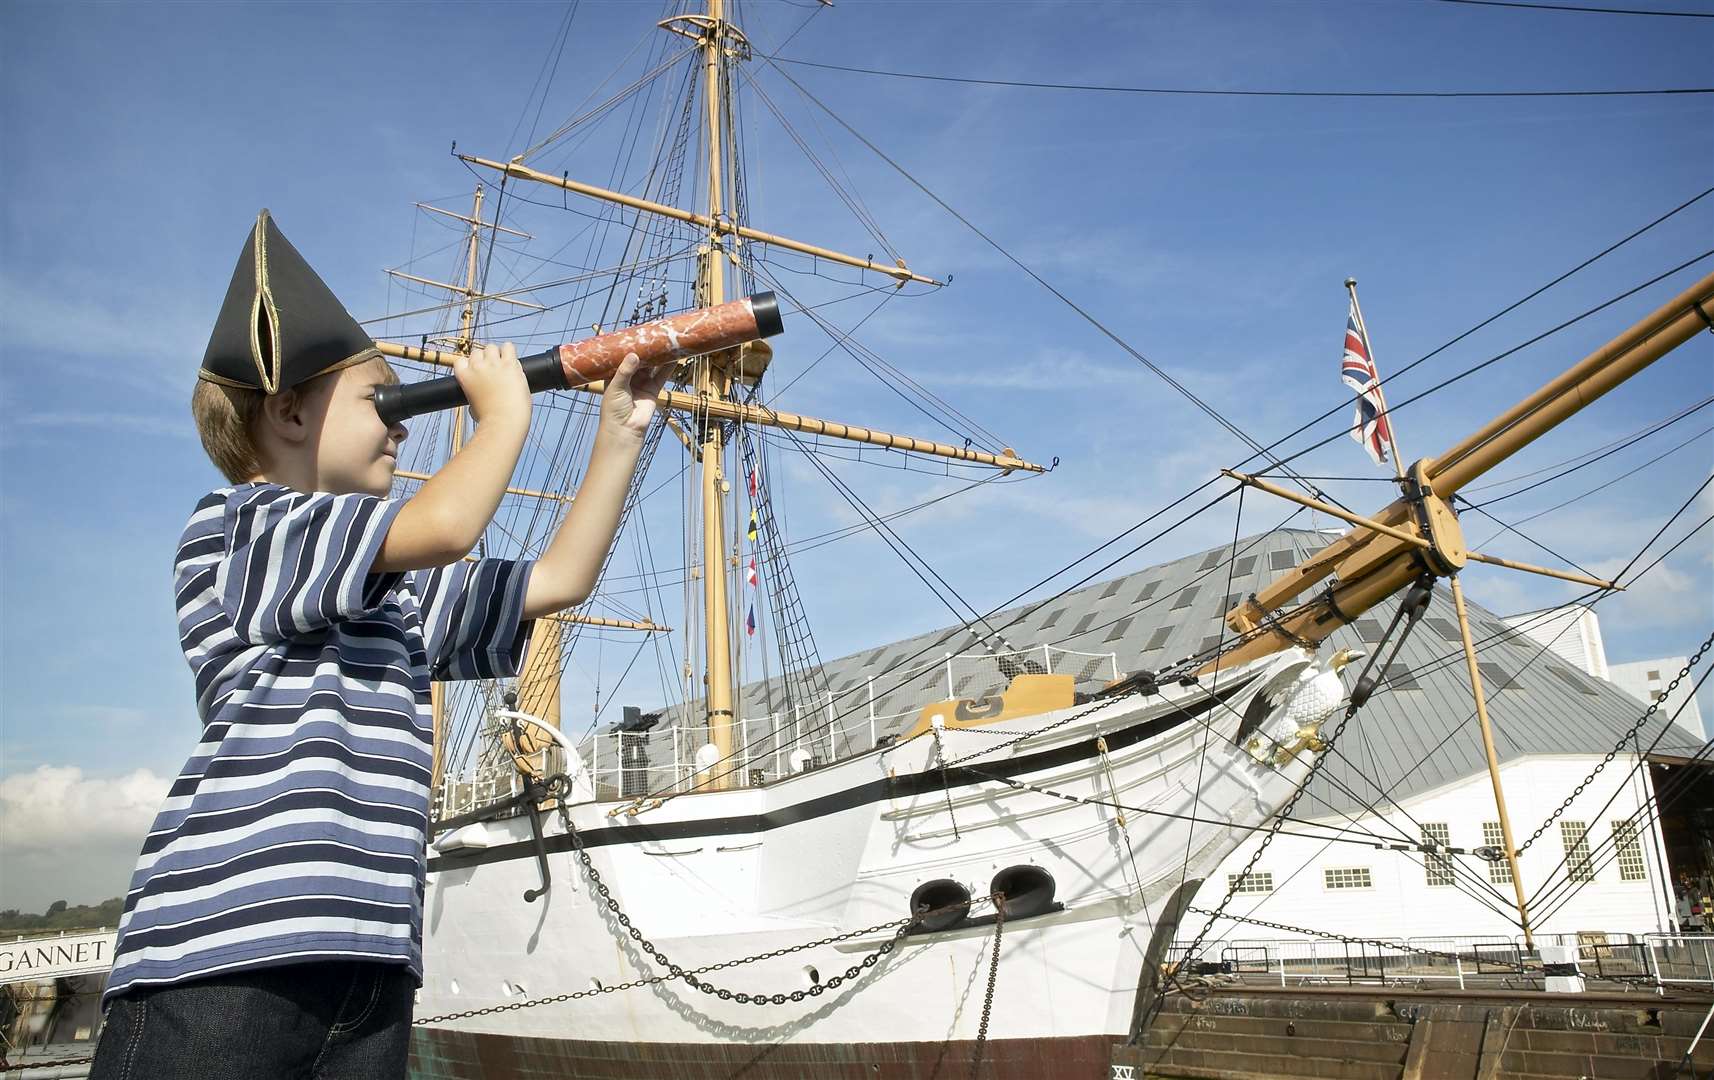 The Historic Dockyard Chatham will be part of Kent Big Weekend 2019